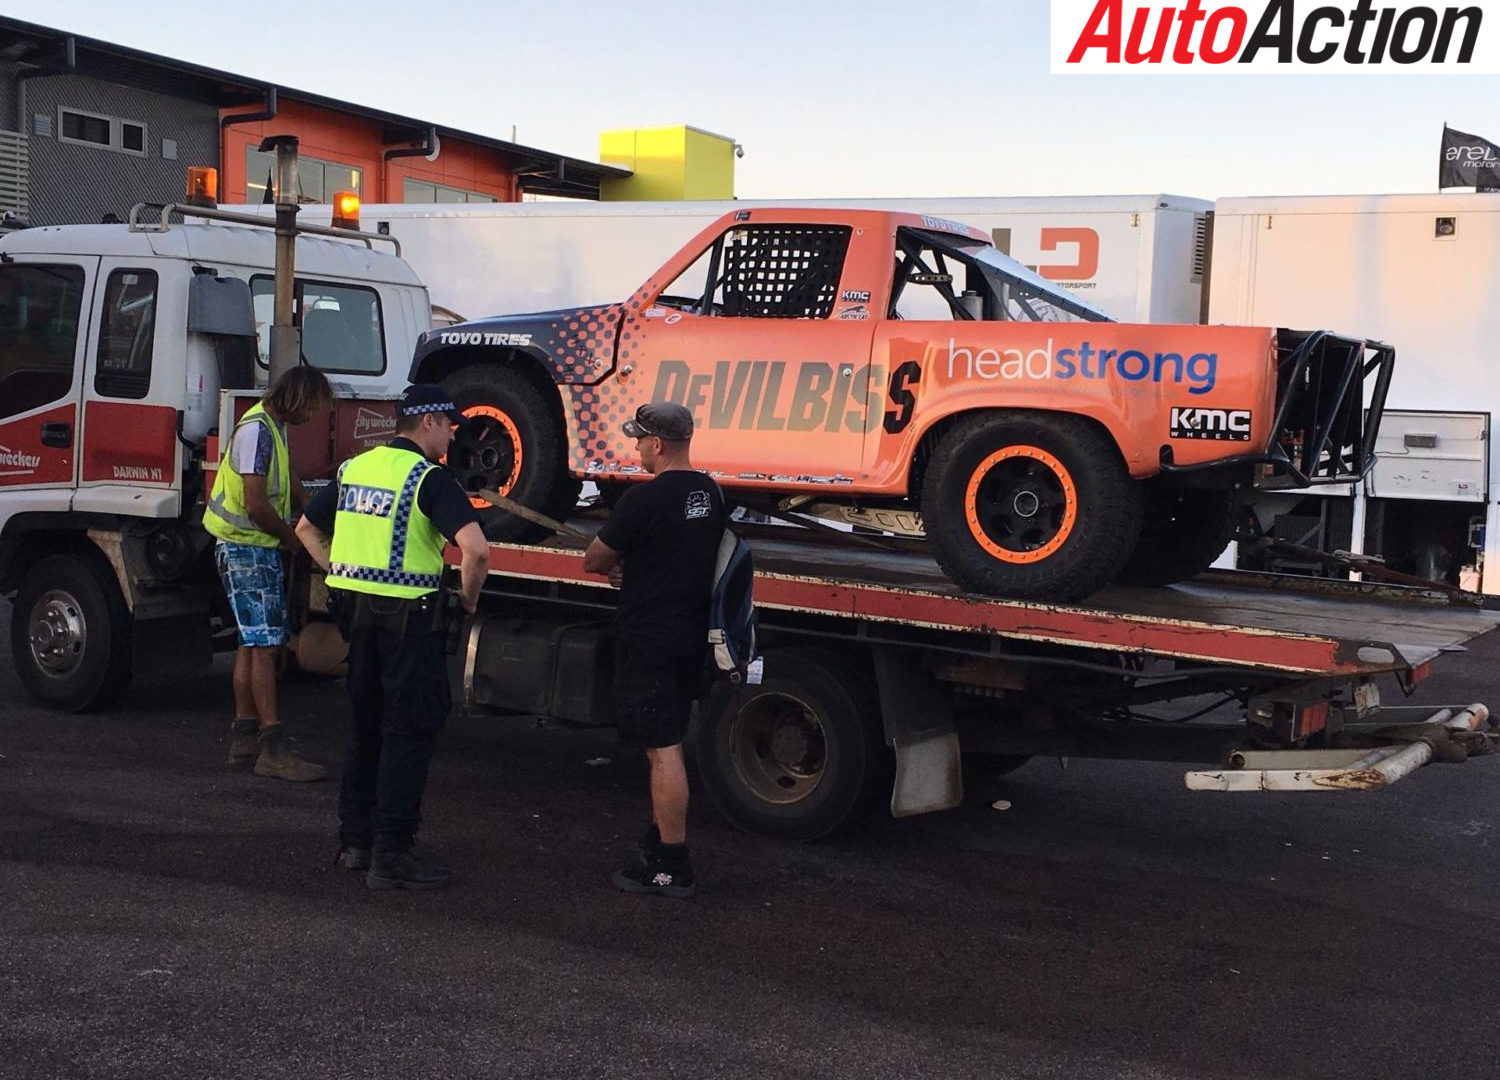 The Stadium Super Truck driven by Robby Gordon impounded by the NT Police